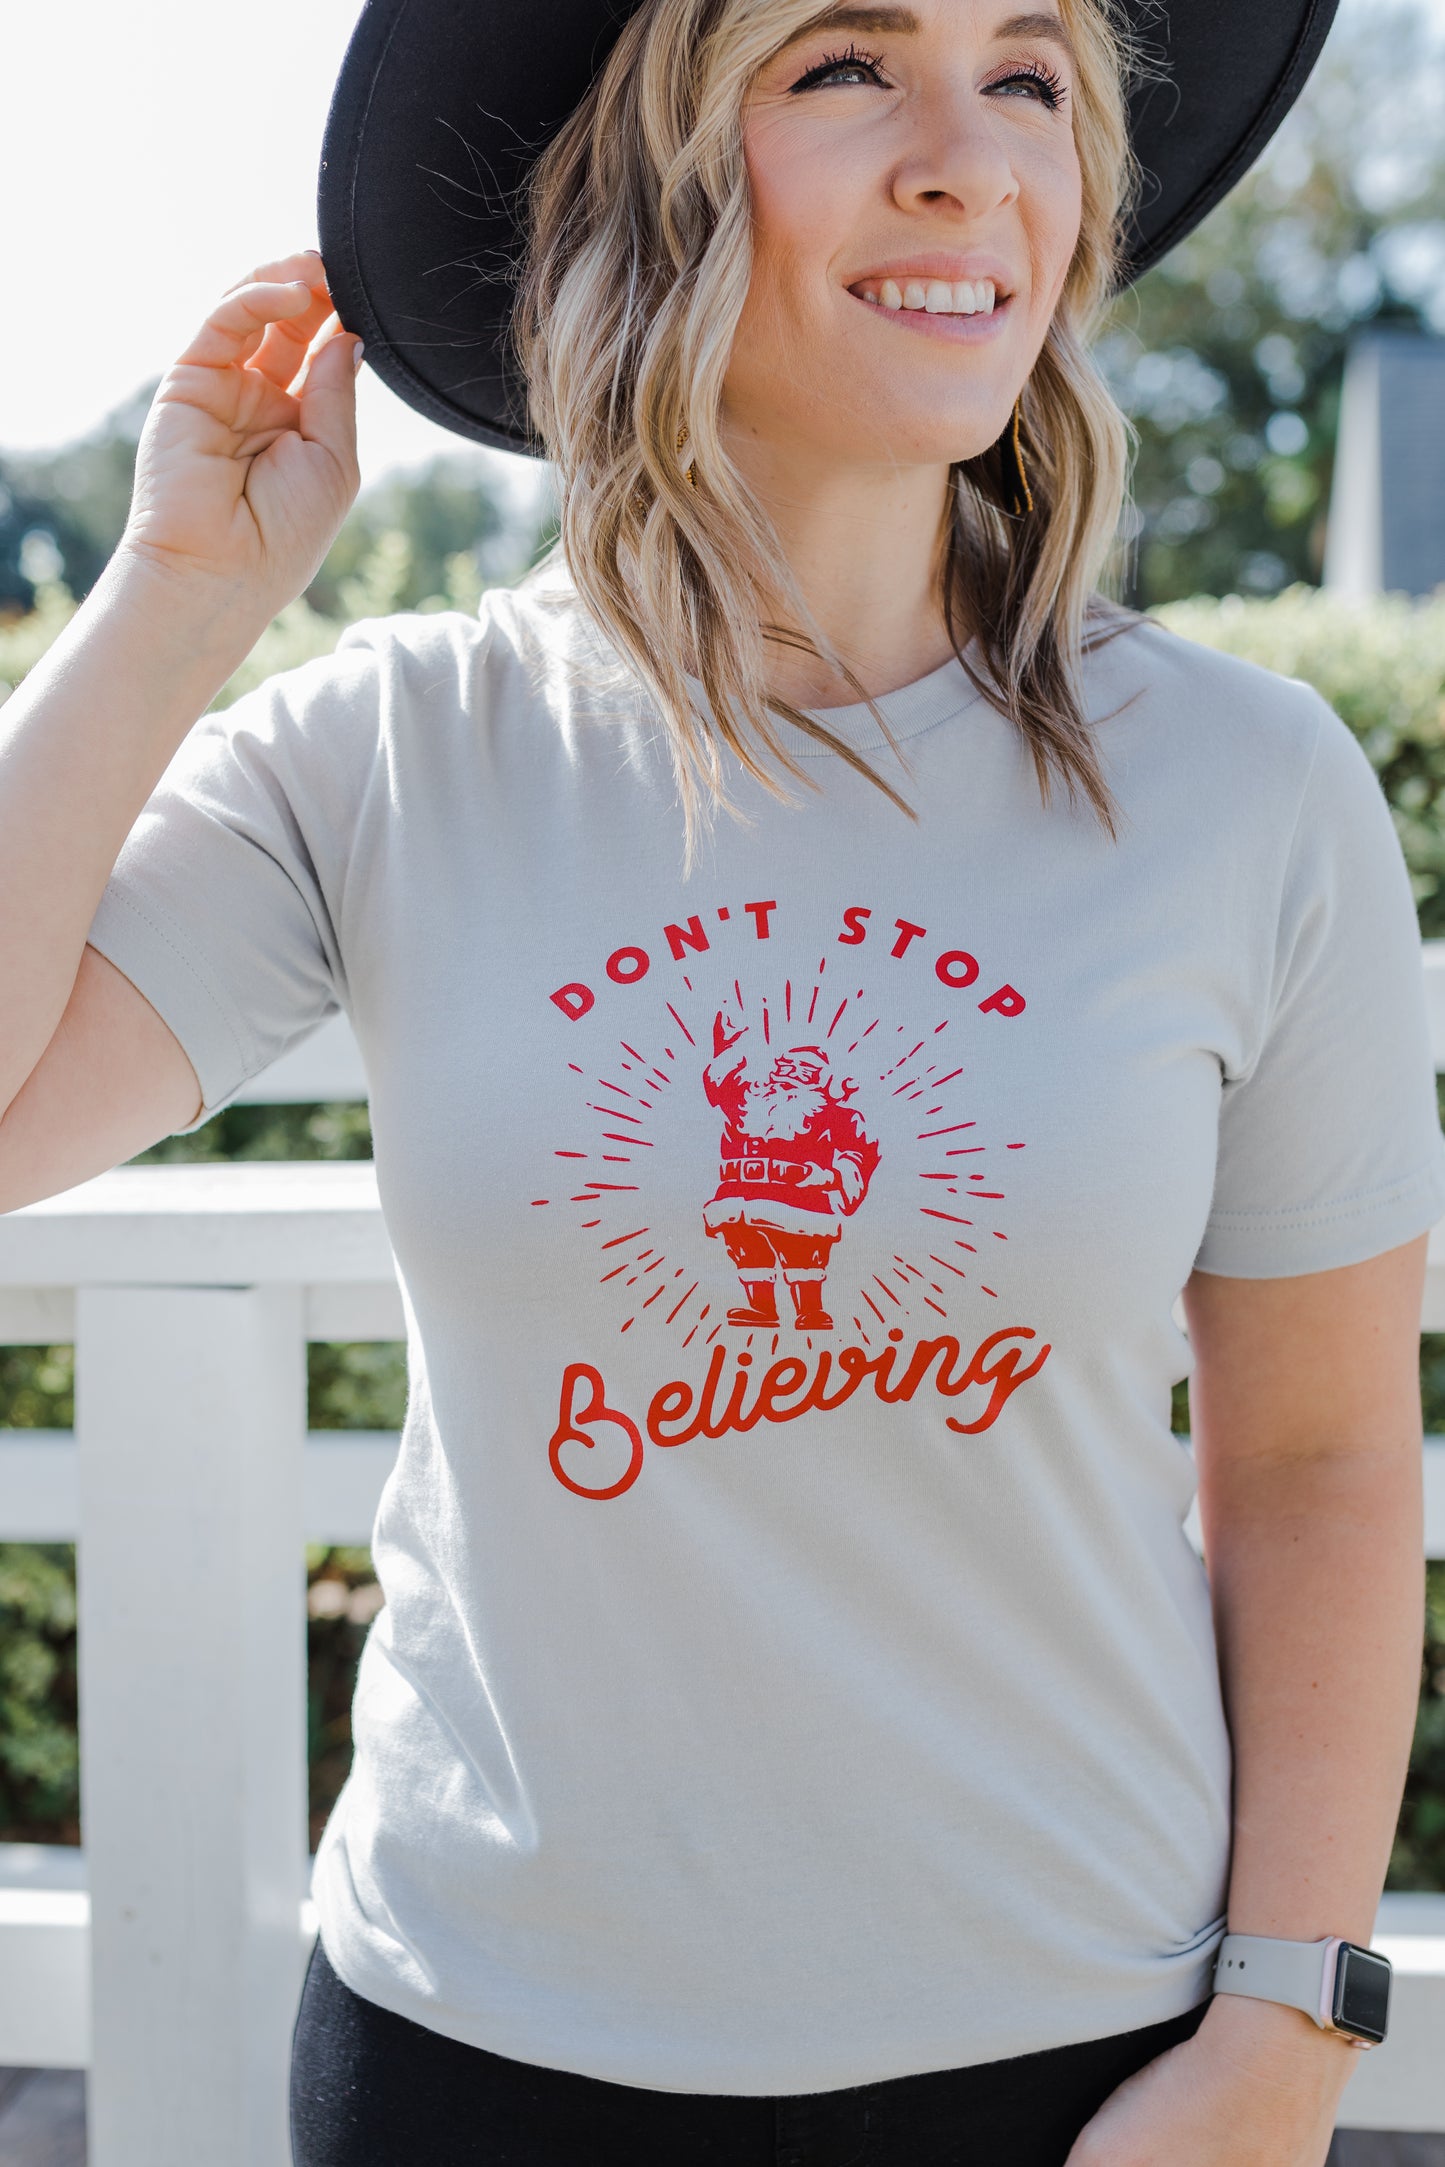 Don't Stop Believing Graphic Tee